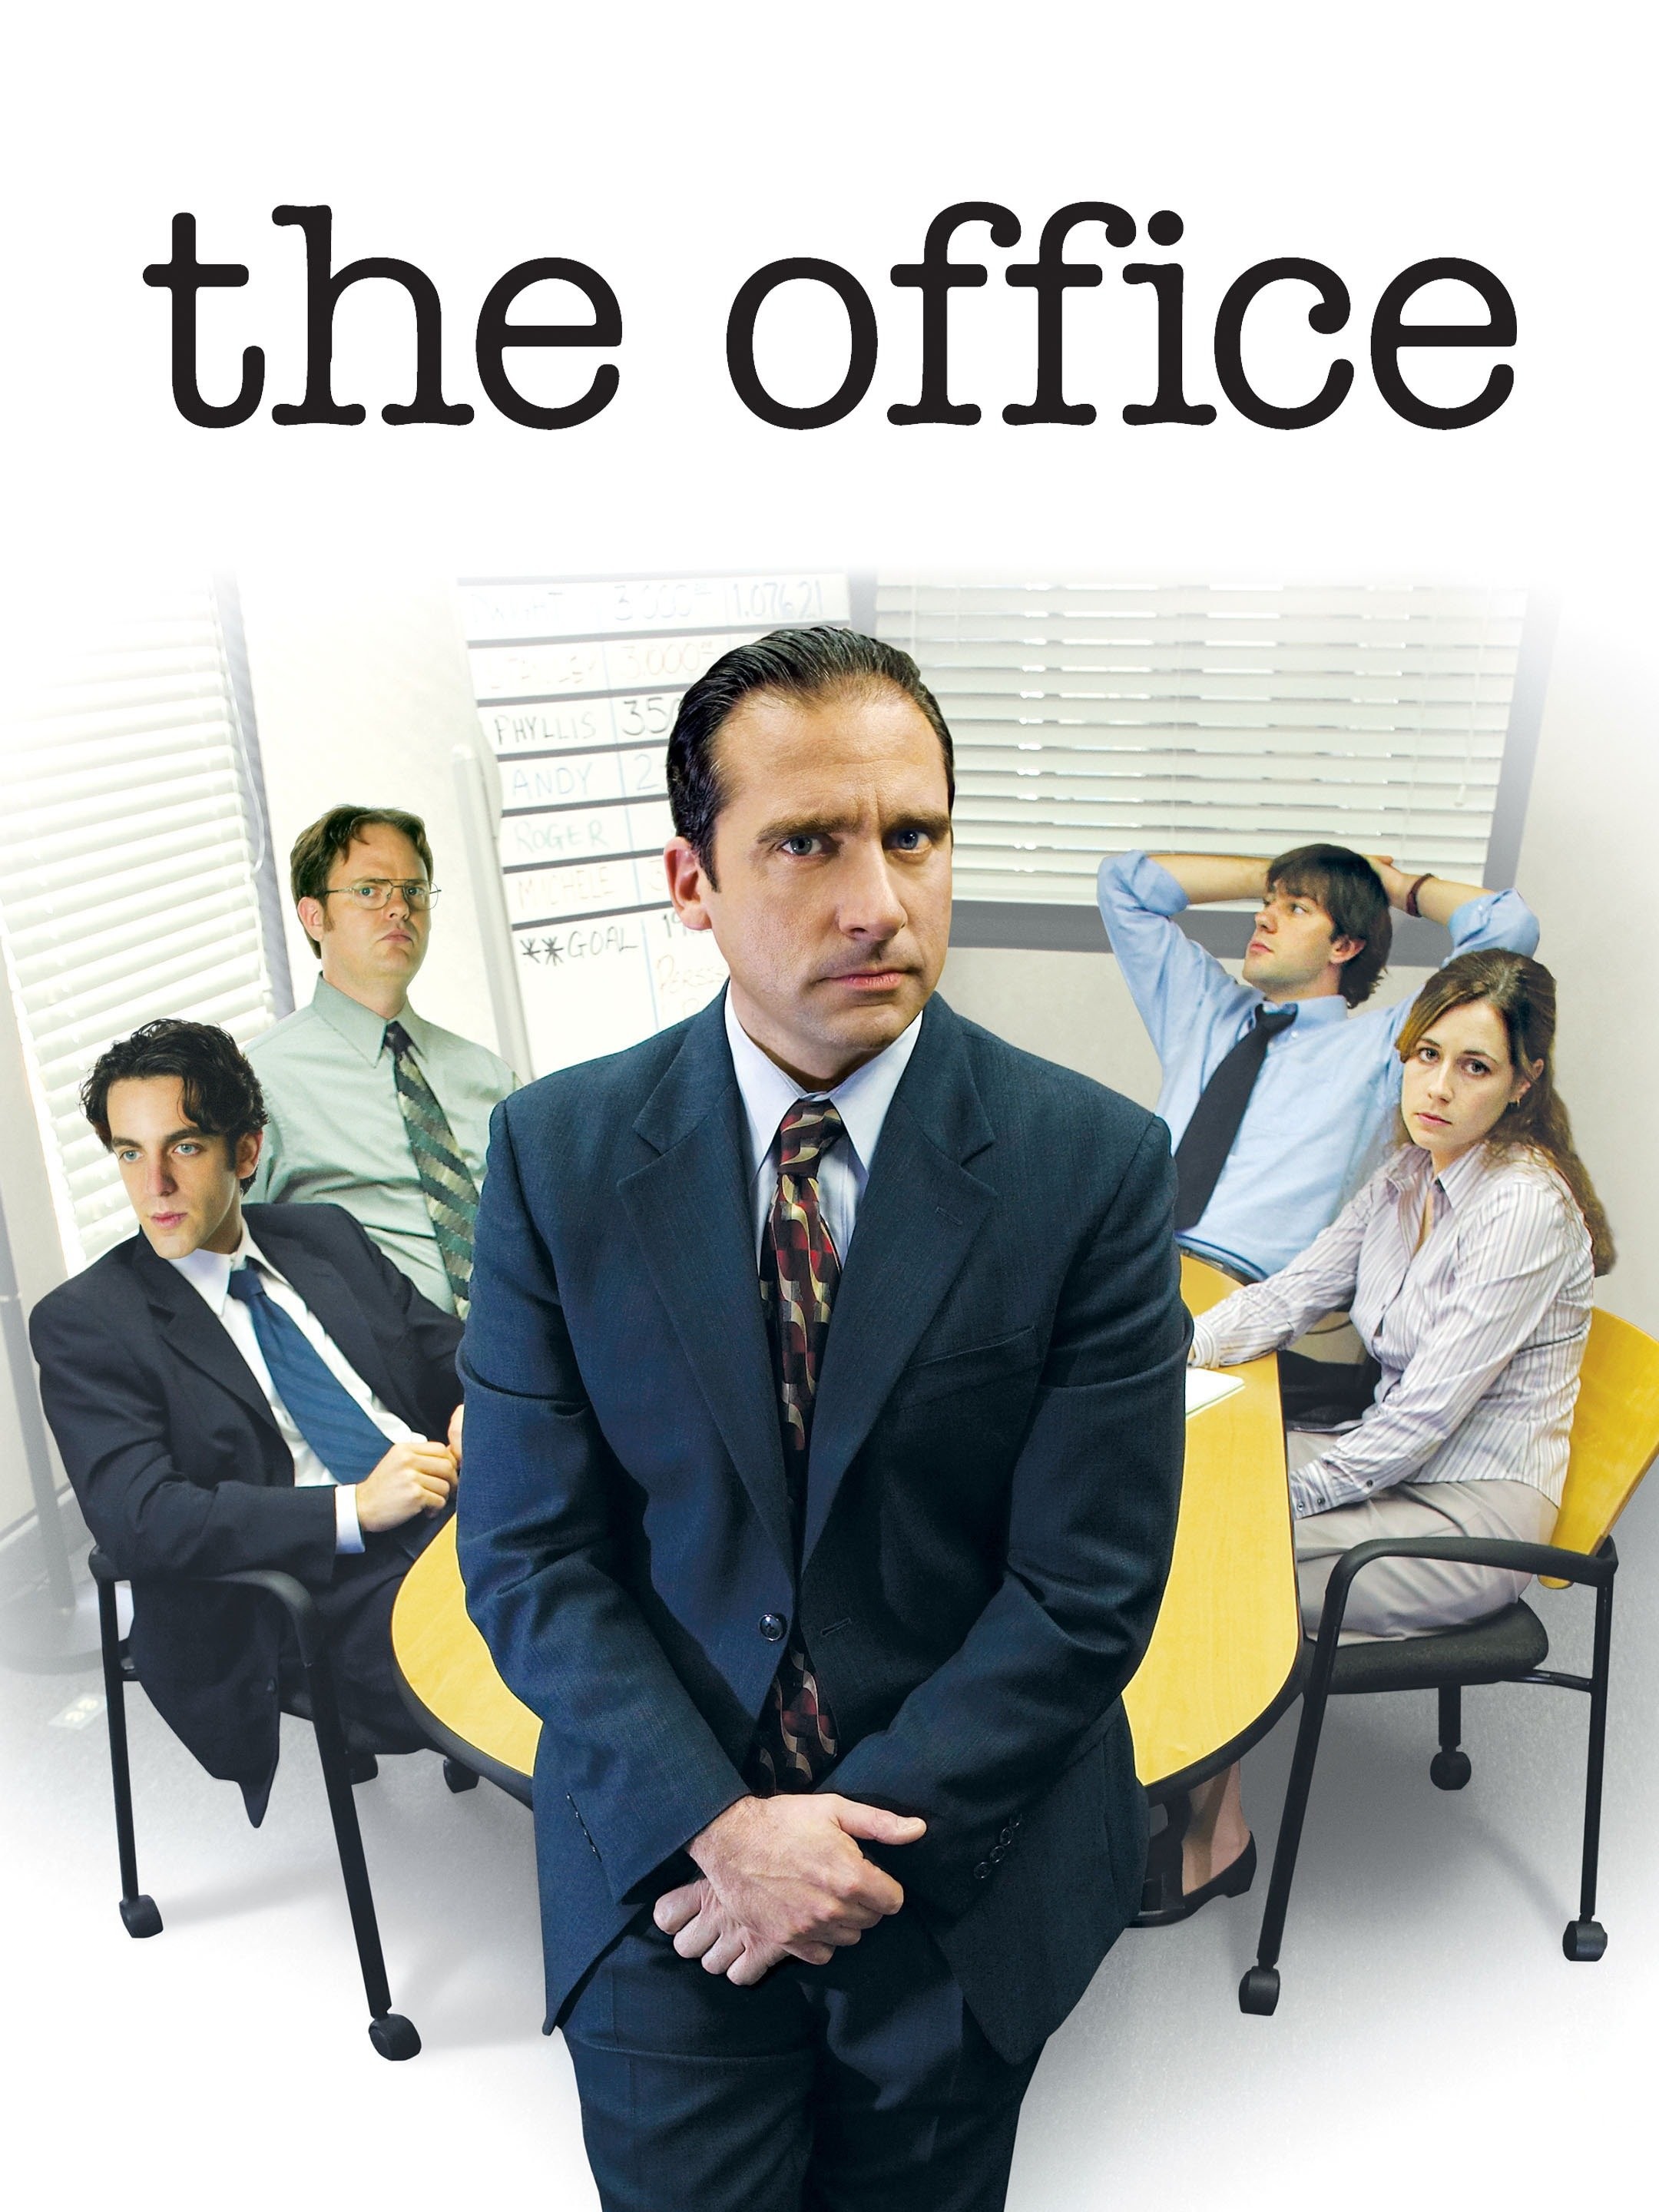 The Dunder Mifflin Commercial Song - The Office US 